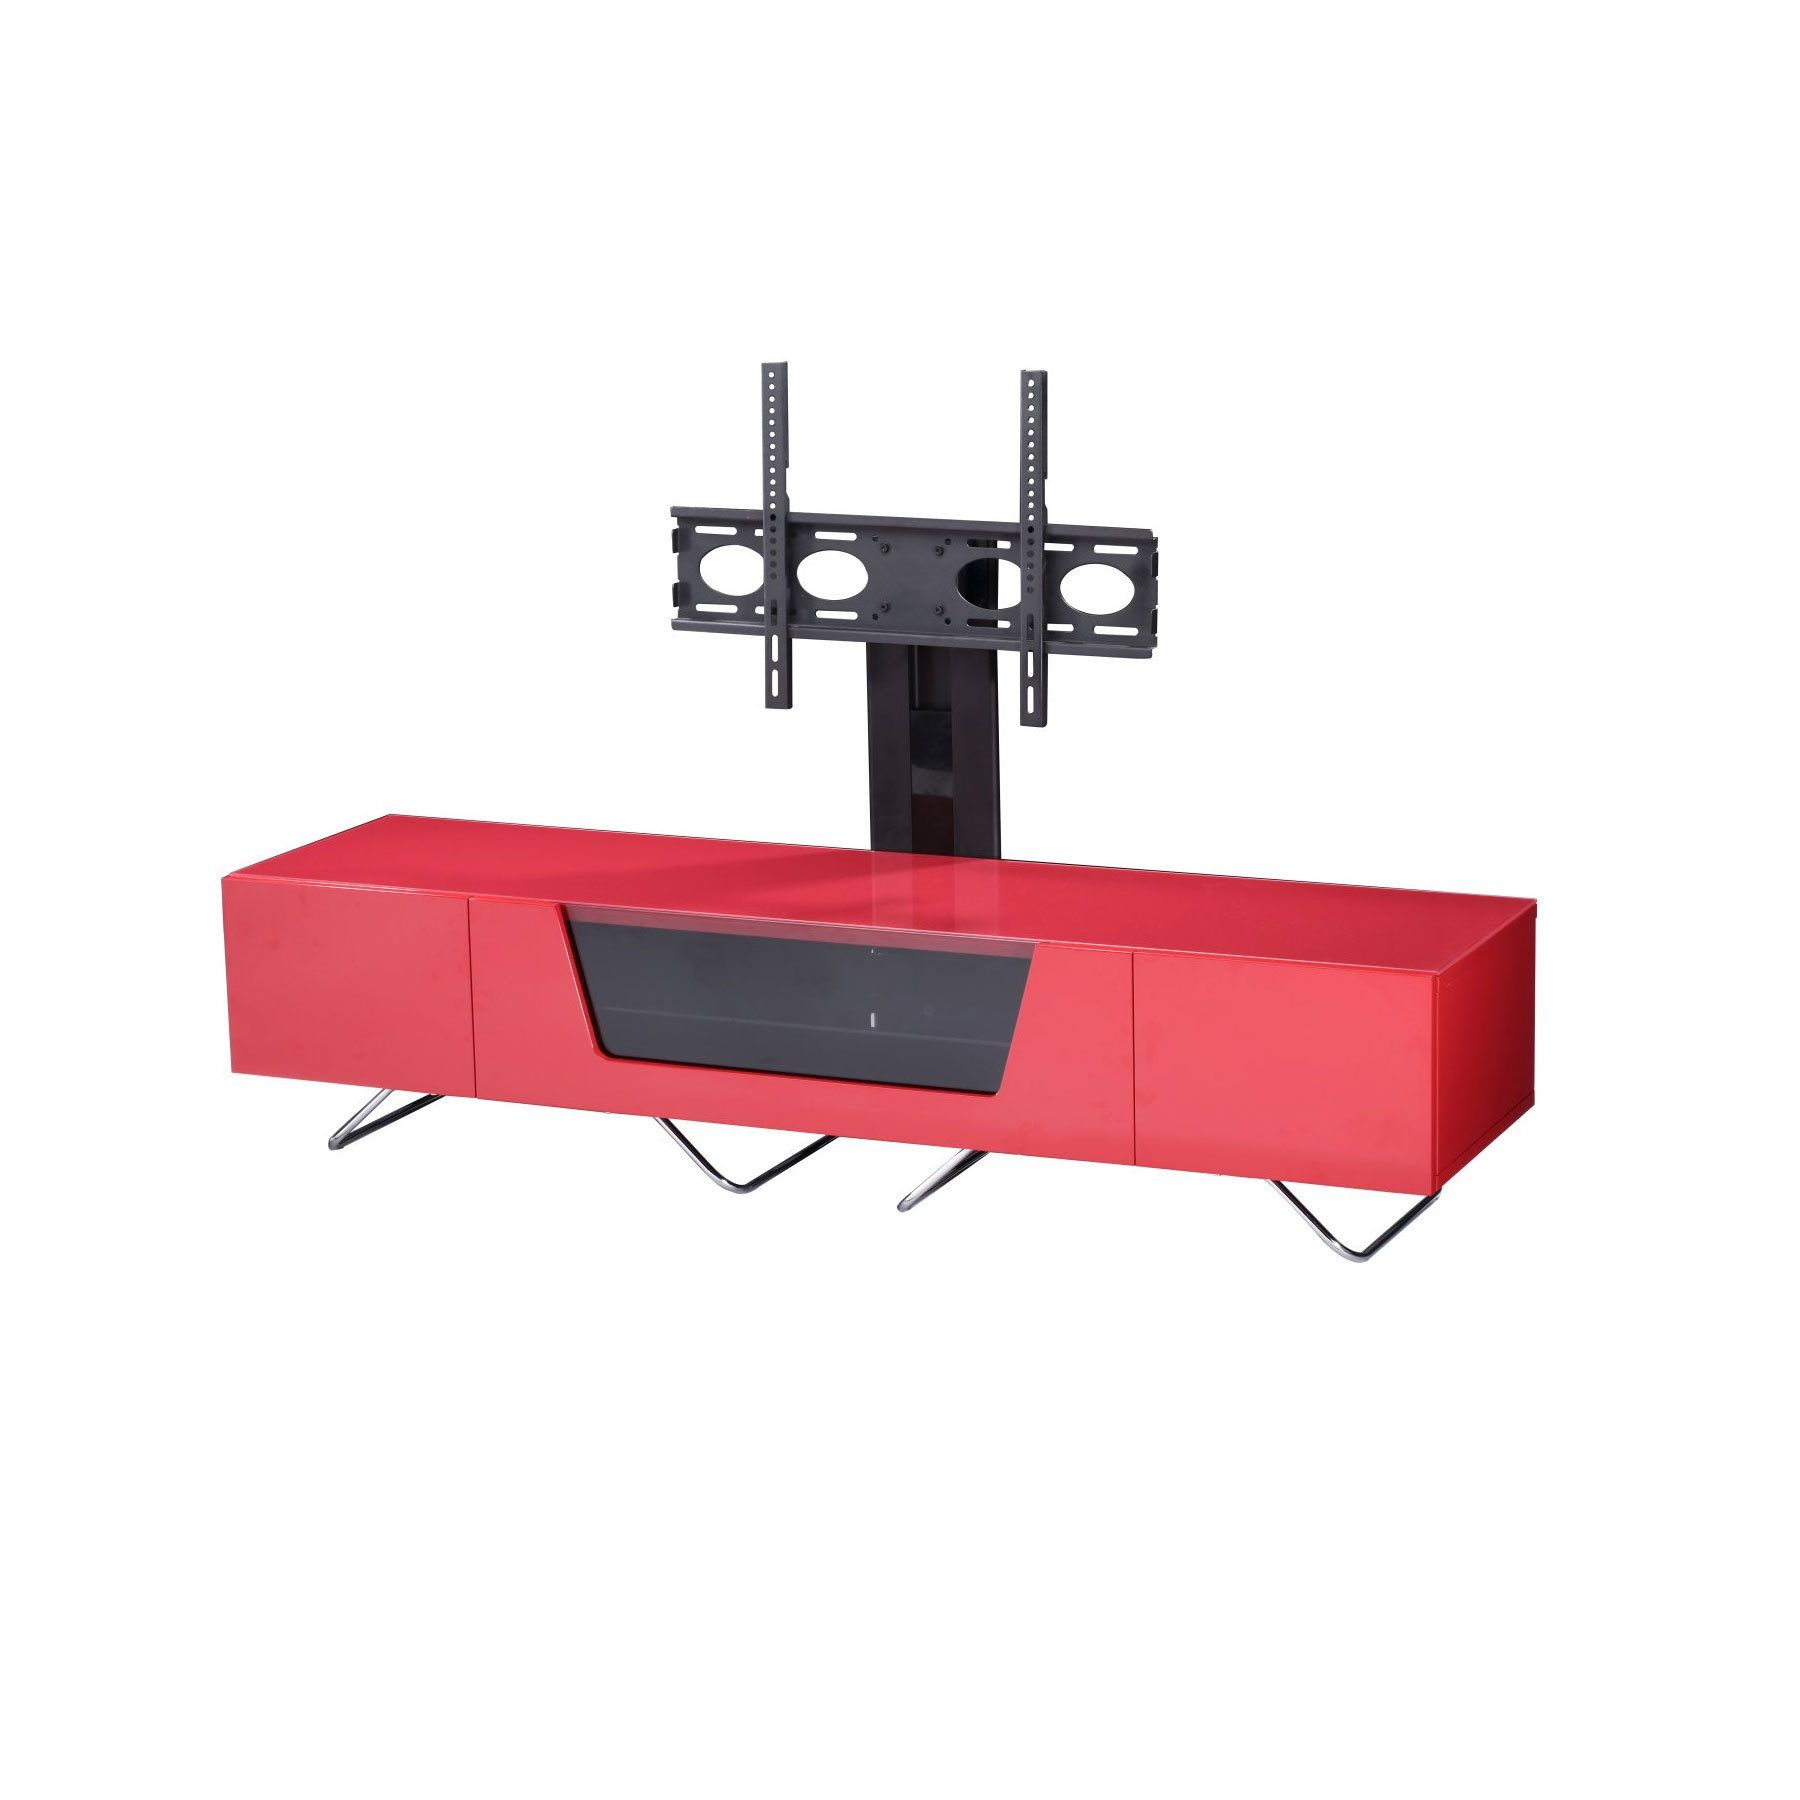 Famous Chrissy Tv Stands For Tvs Up To 75" Within Alphason Chromium 2 160cm Red Tv Stand For Up To 75" Tvs (View 25 of 25)